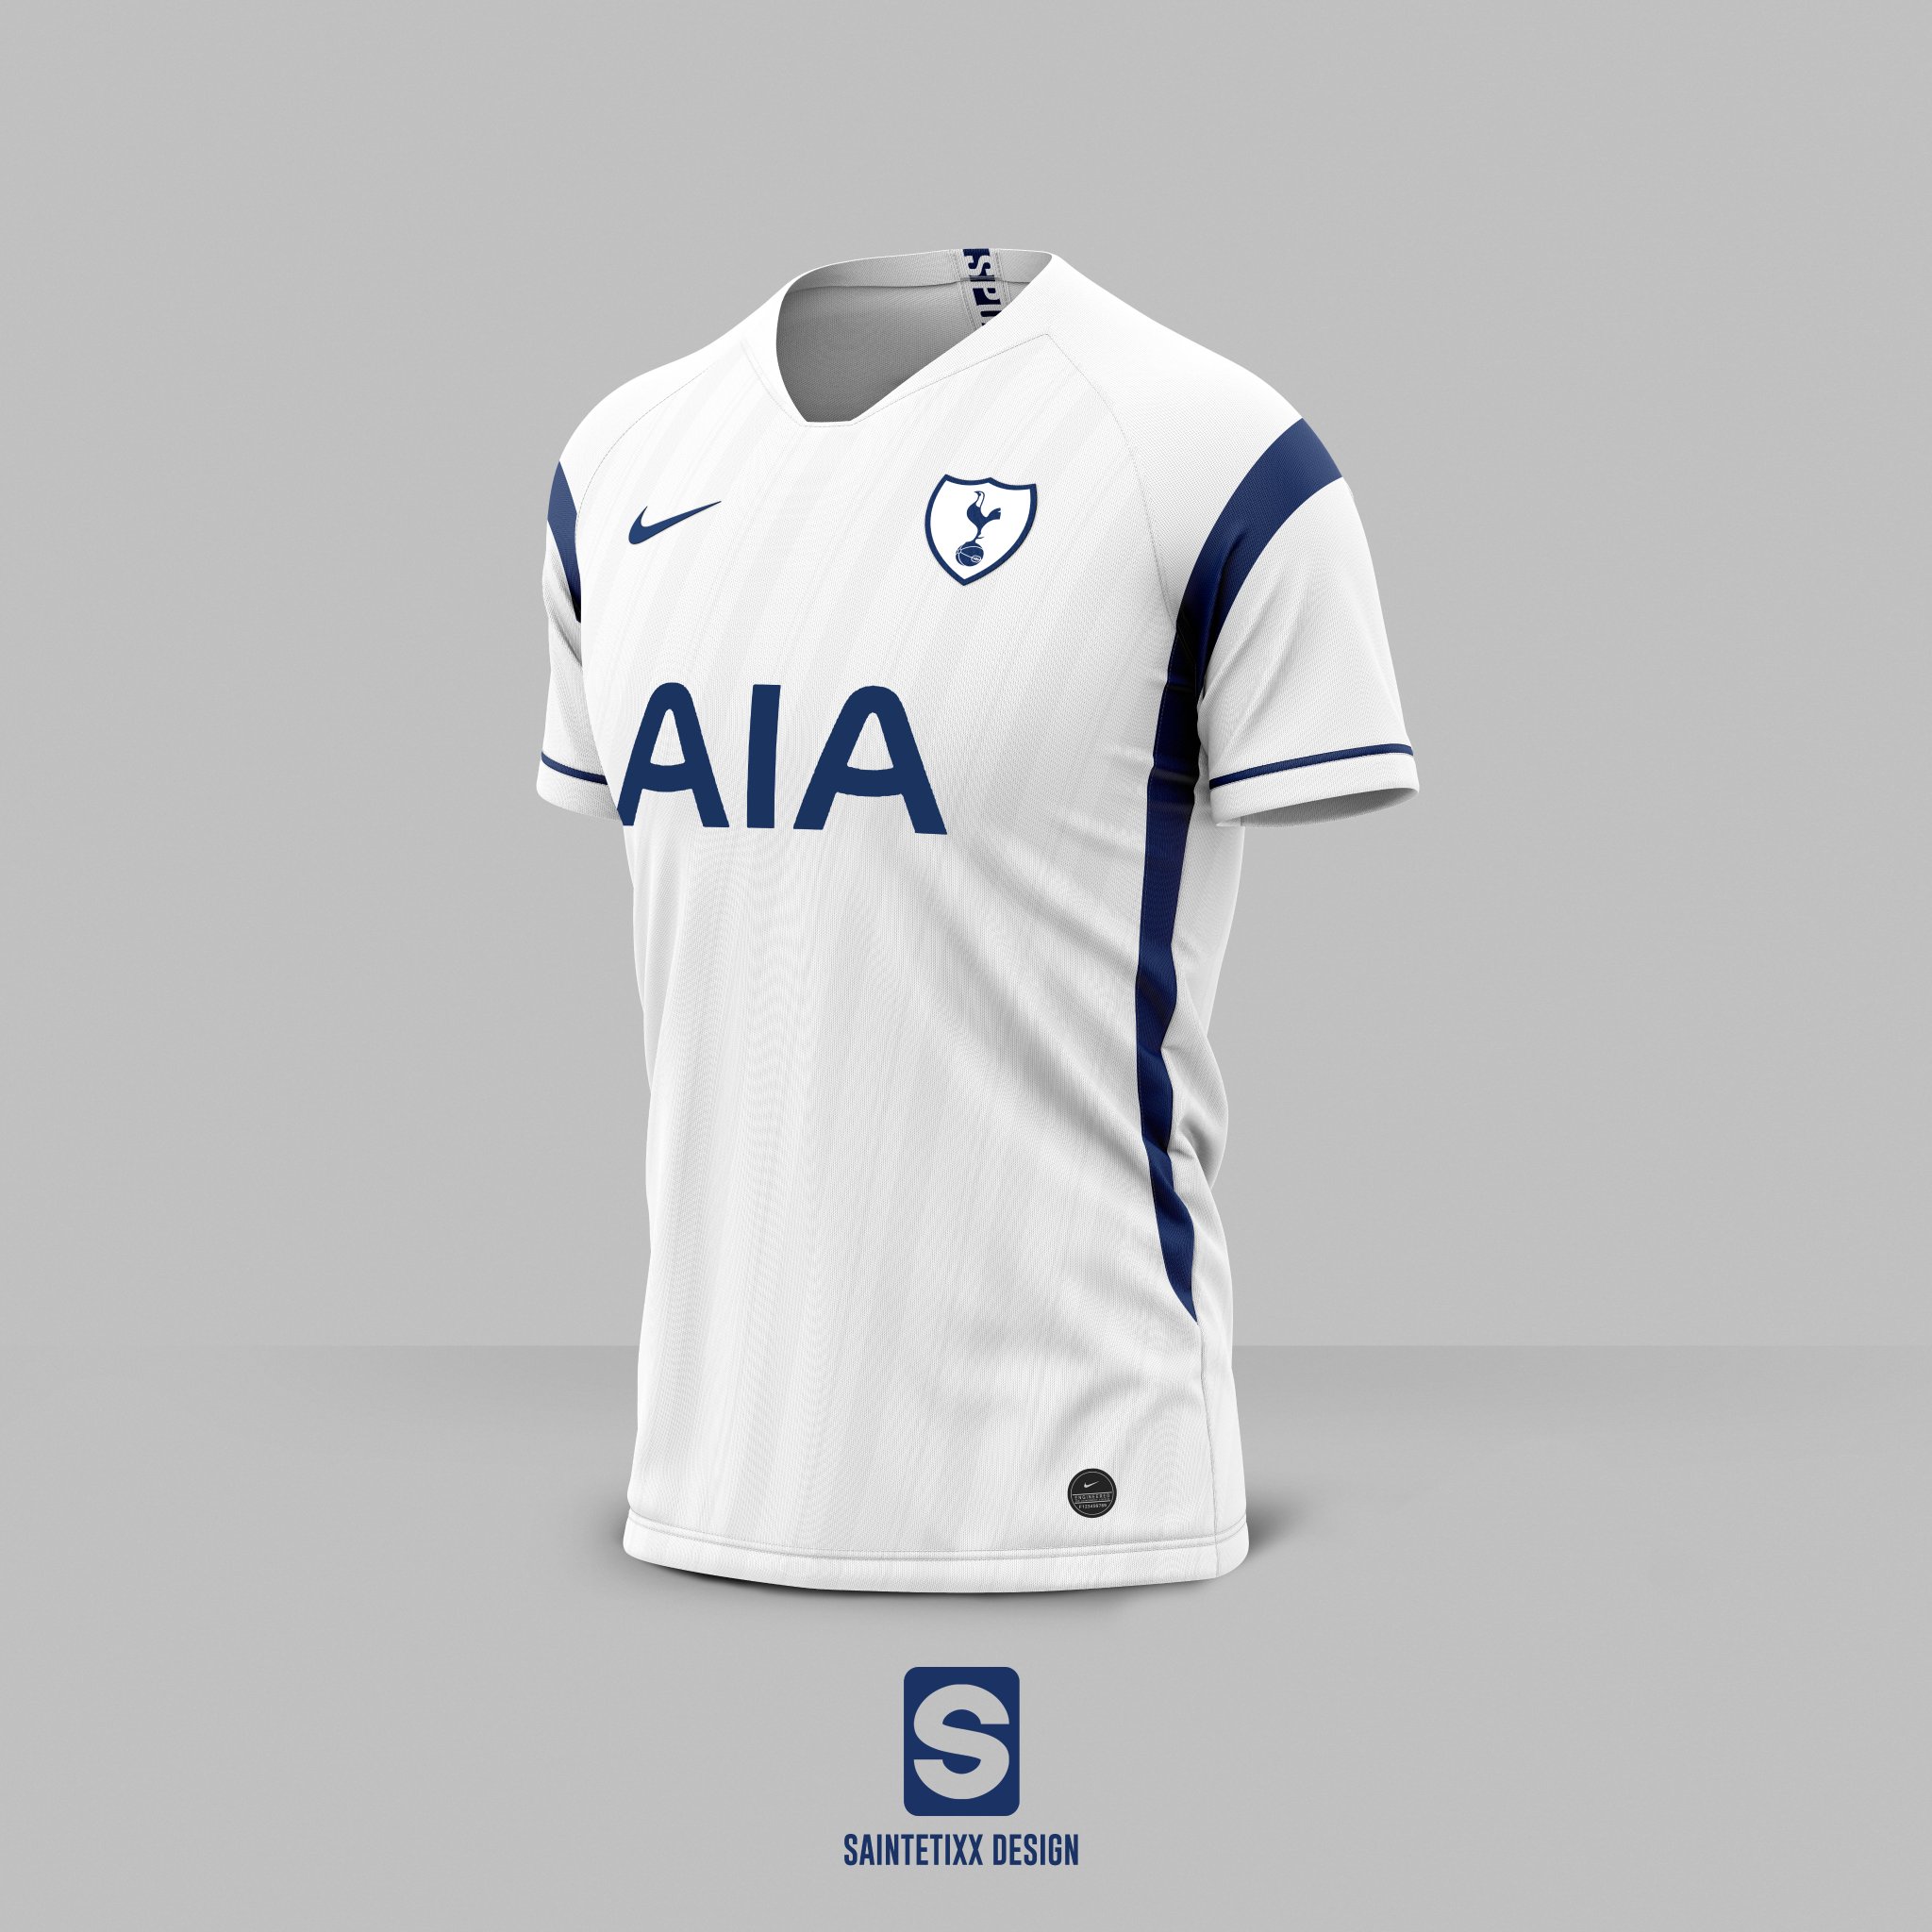 Concept Kits on X: Tottenham Hotspur Football Club home, away and third kit  concepts 2022/23. #Spurs #COYS #Tottenham #TottenhamHotspur #Nike #THFC  #Design #Edit #KitConcept #ConceptKit  / X